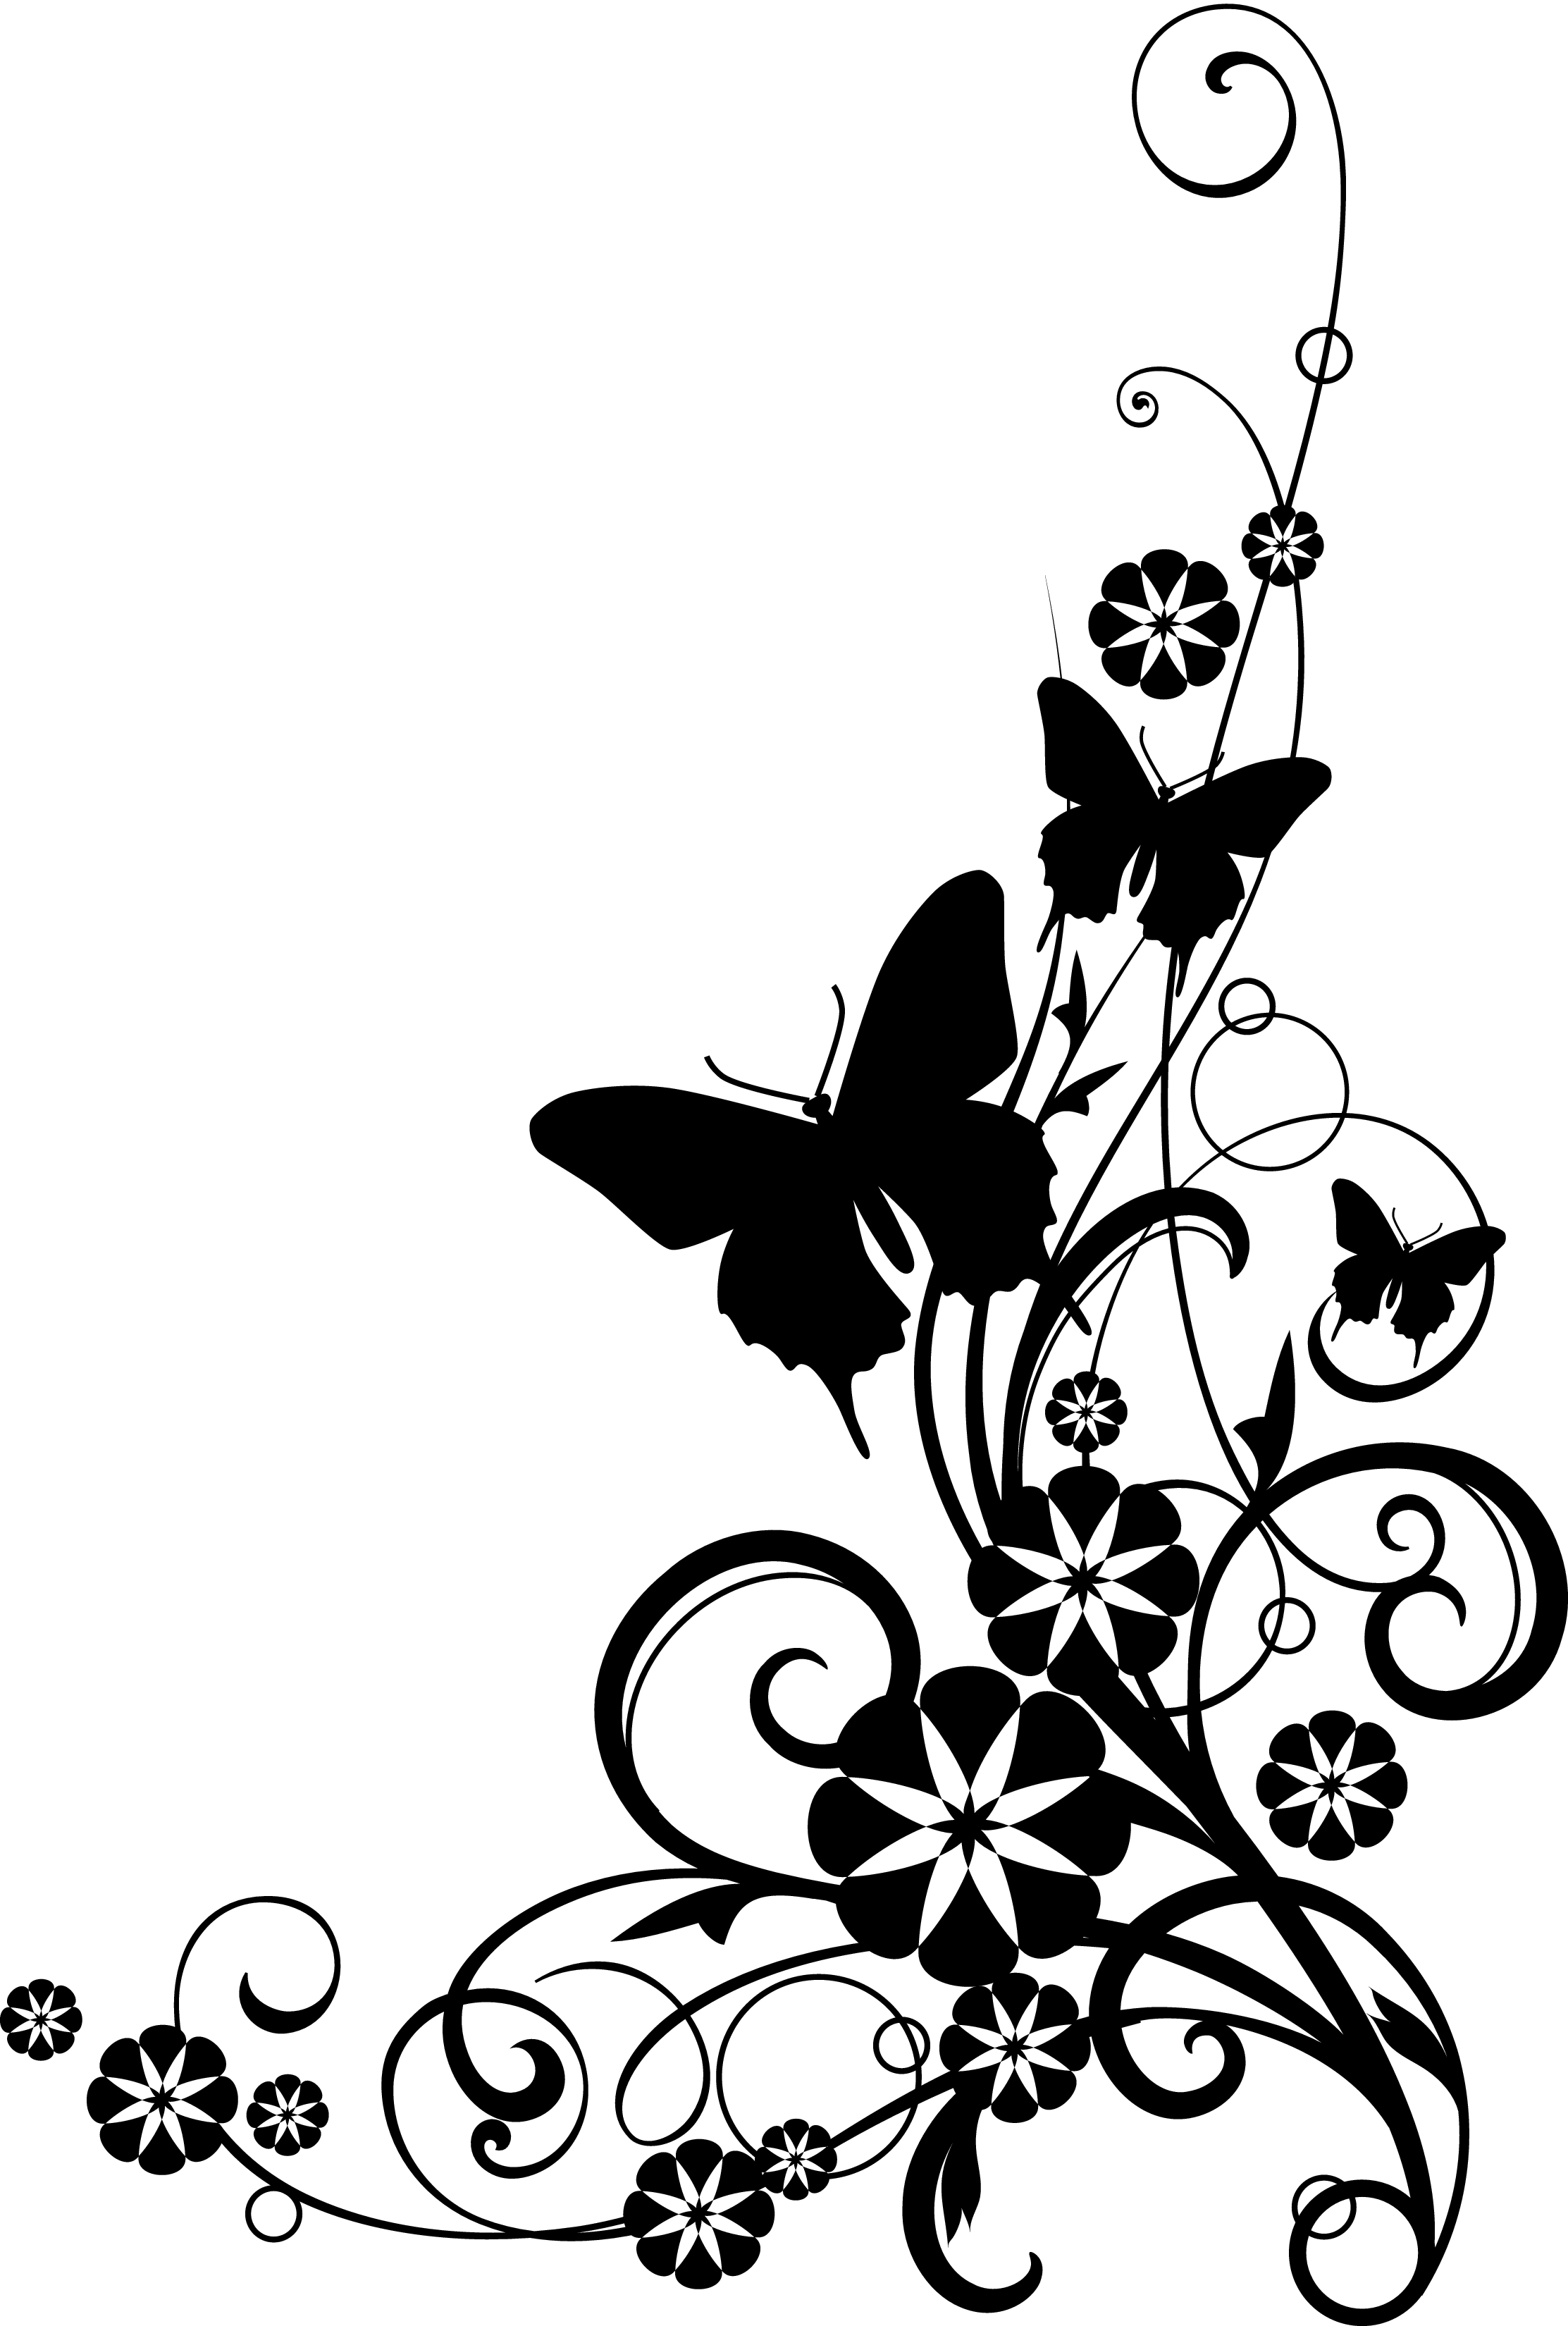 Black And White Flower Border | Free Download Clip Art | Free Clip Art